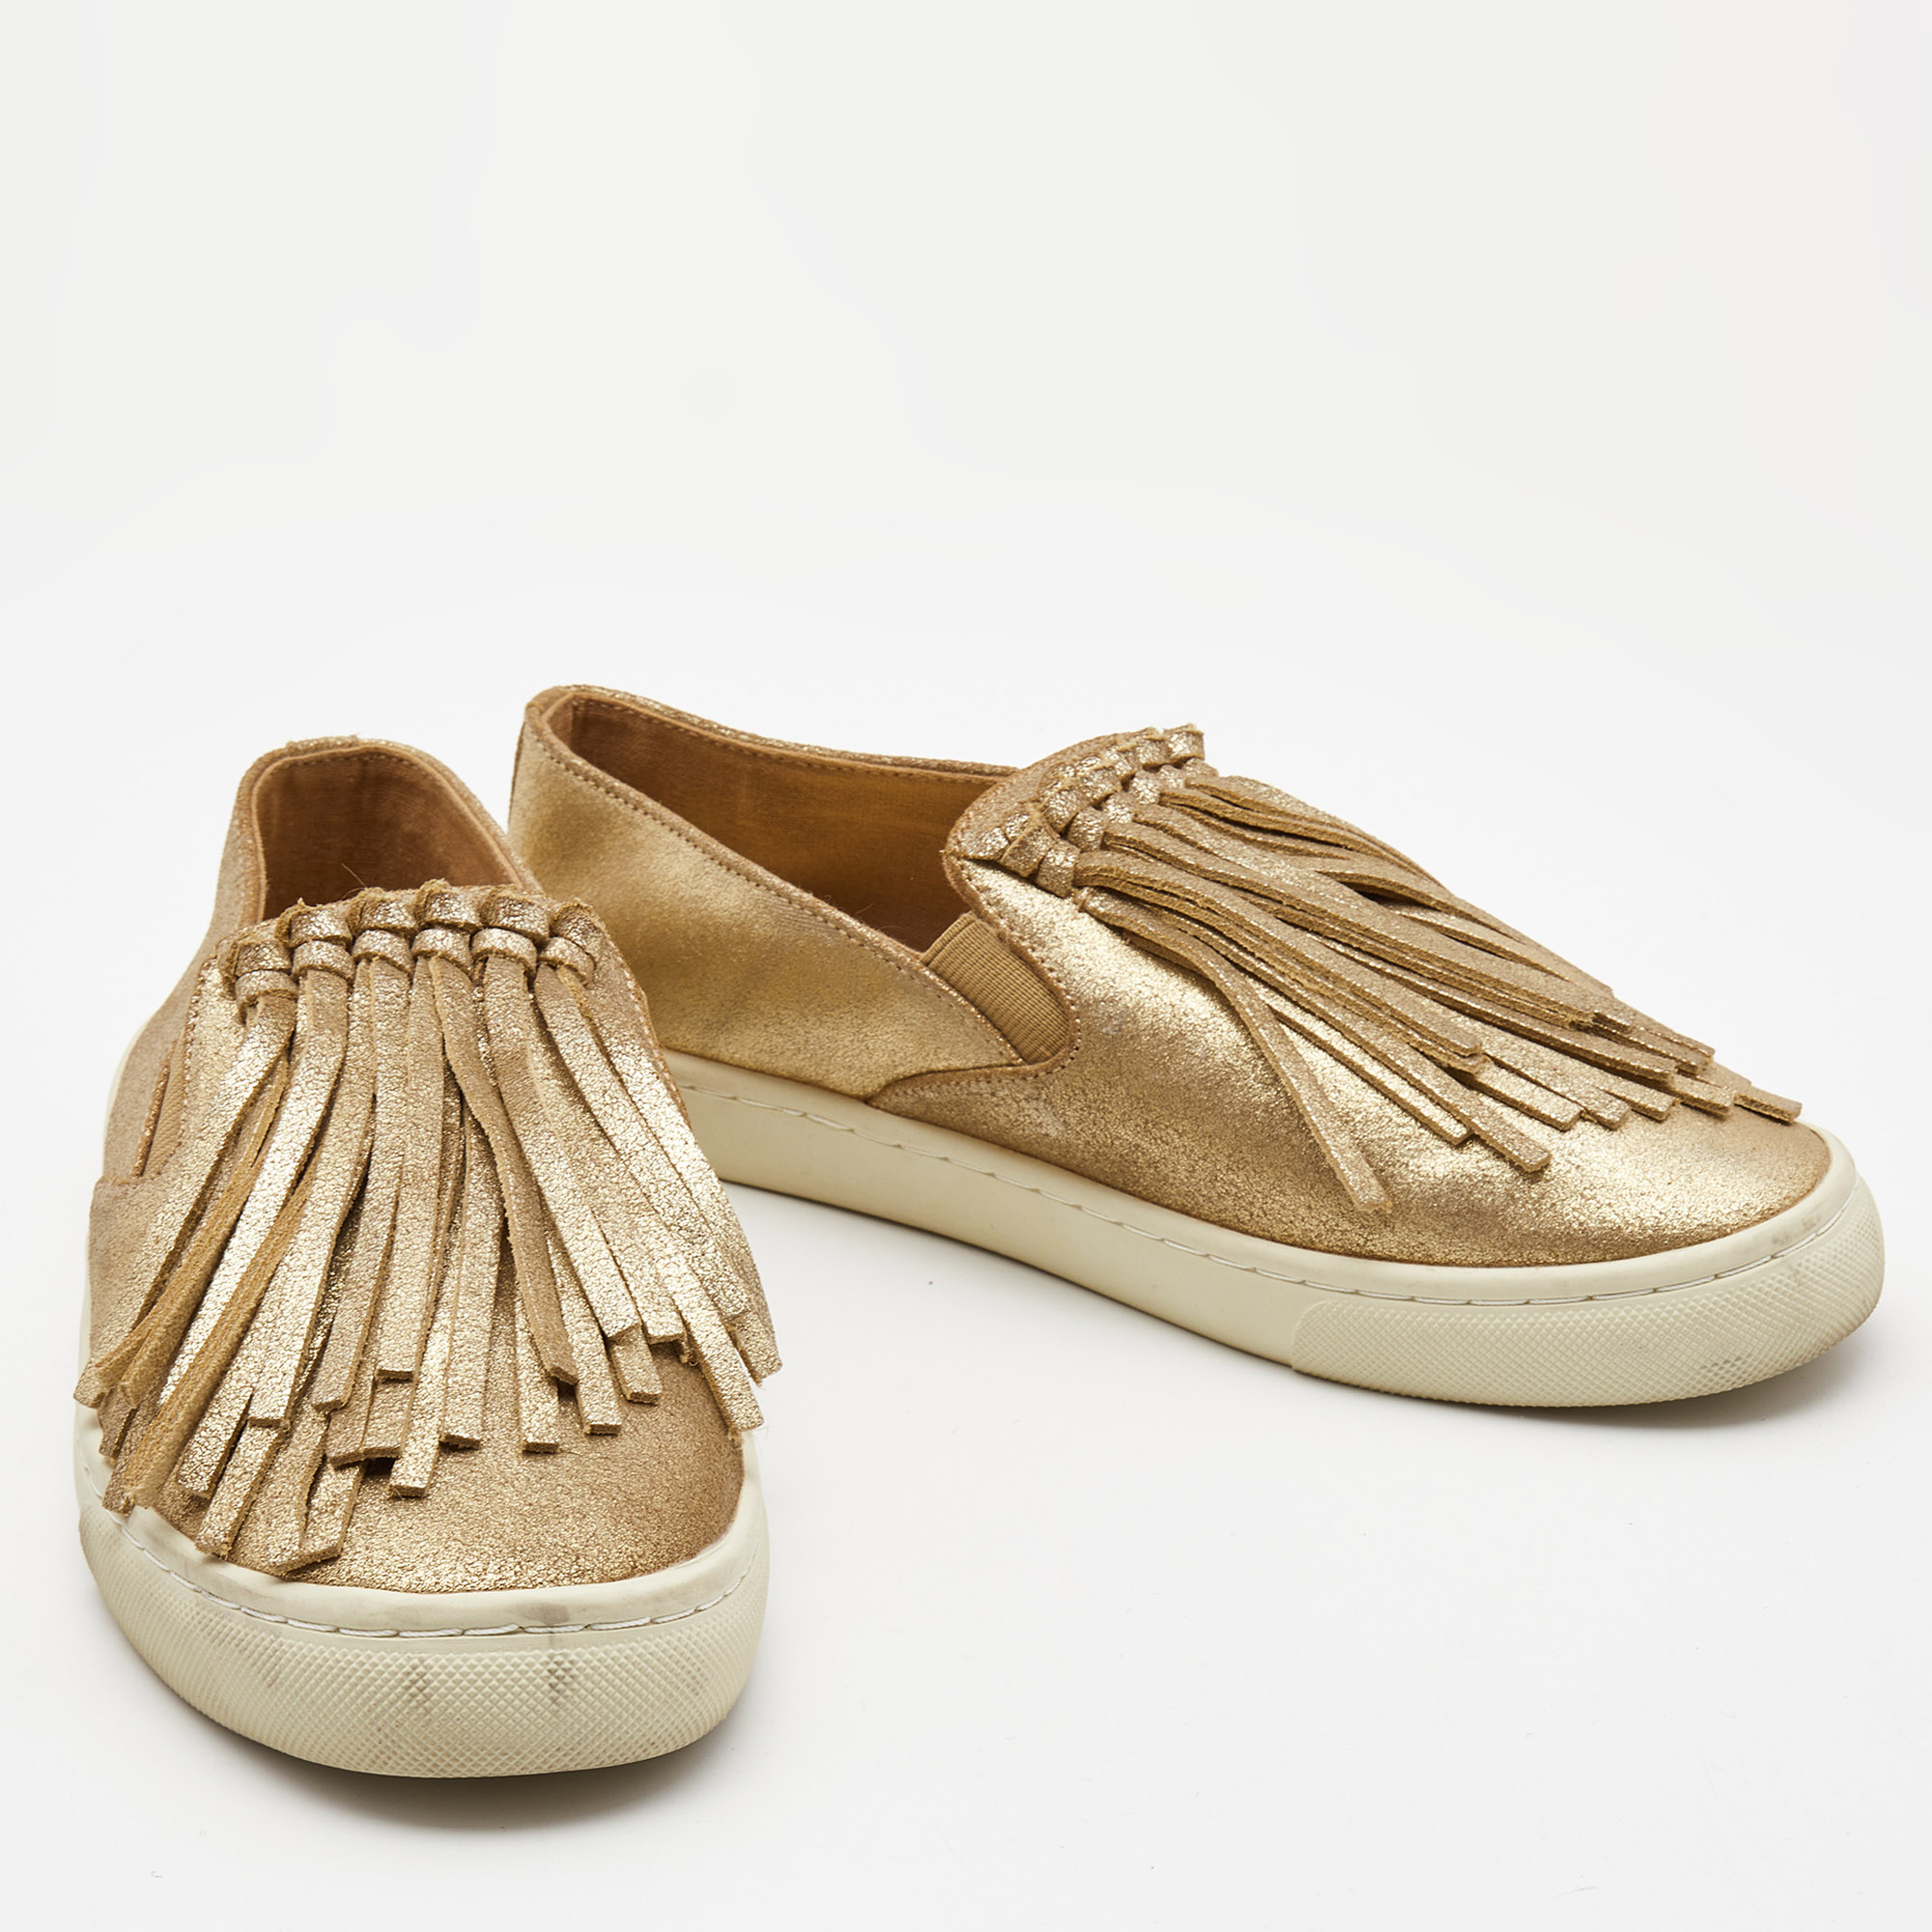 Tory Burch Metallic Gold Leather Fringe Slip On Sneakers Size 38.5